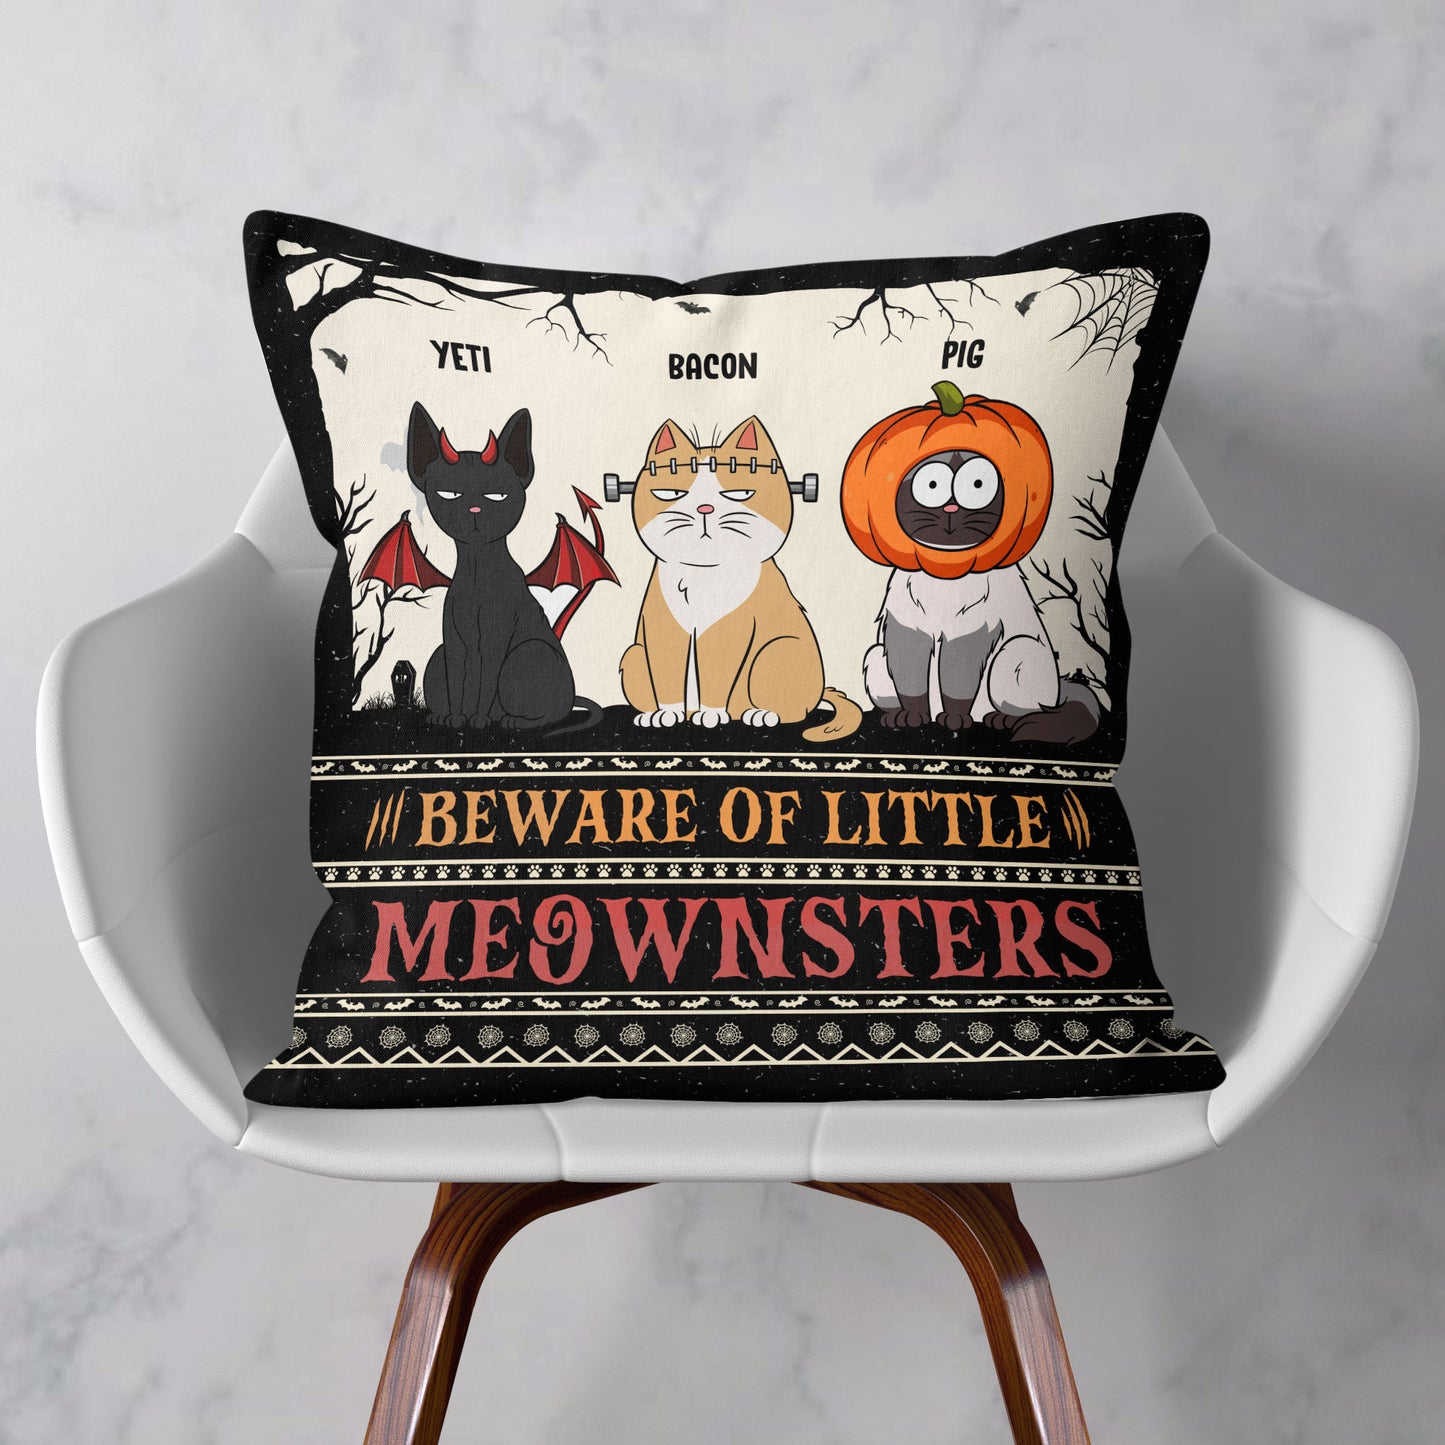 Beware Of Little Meownsters New Version - Personalized Pillow (Insert Included)